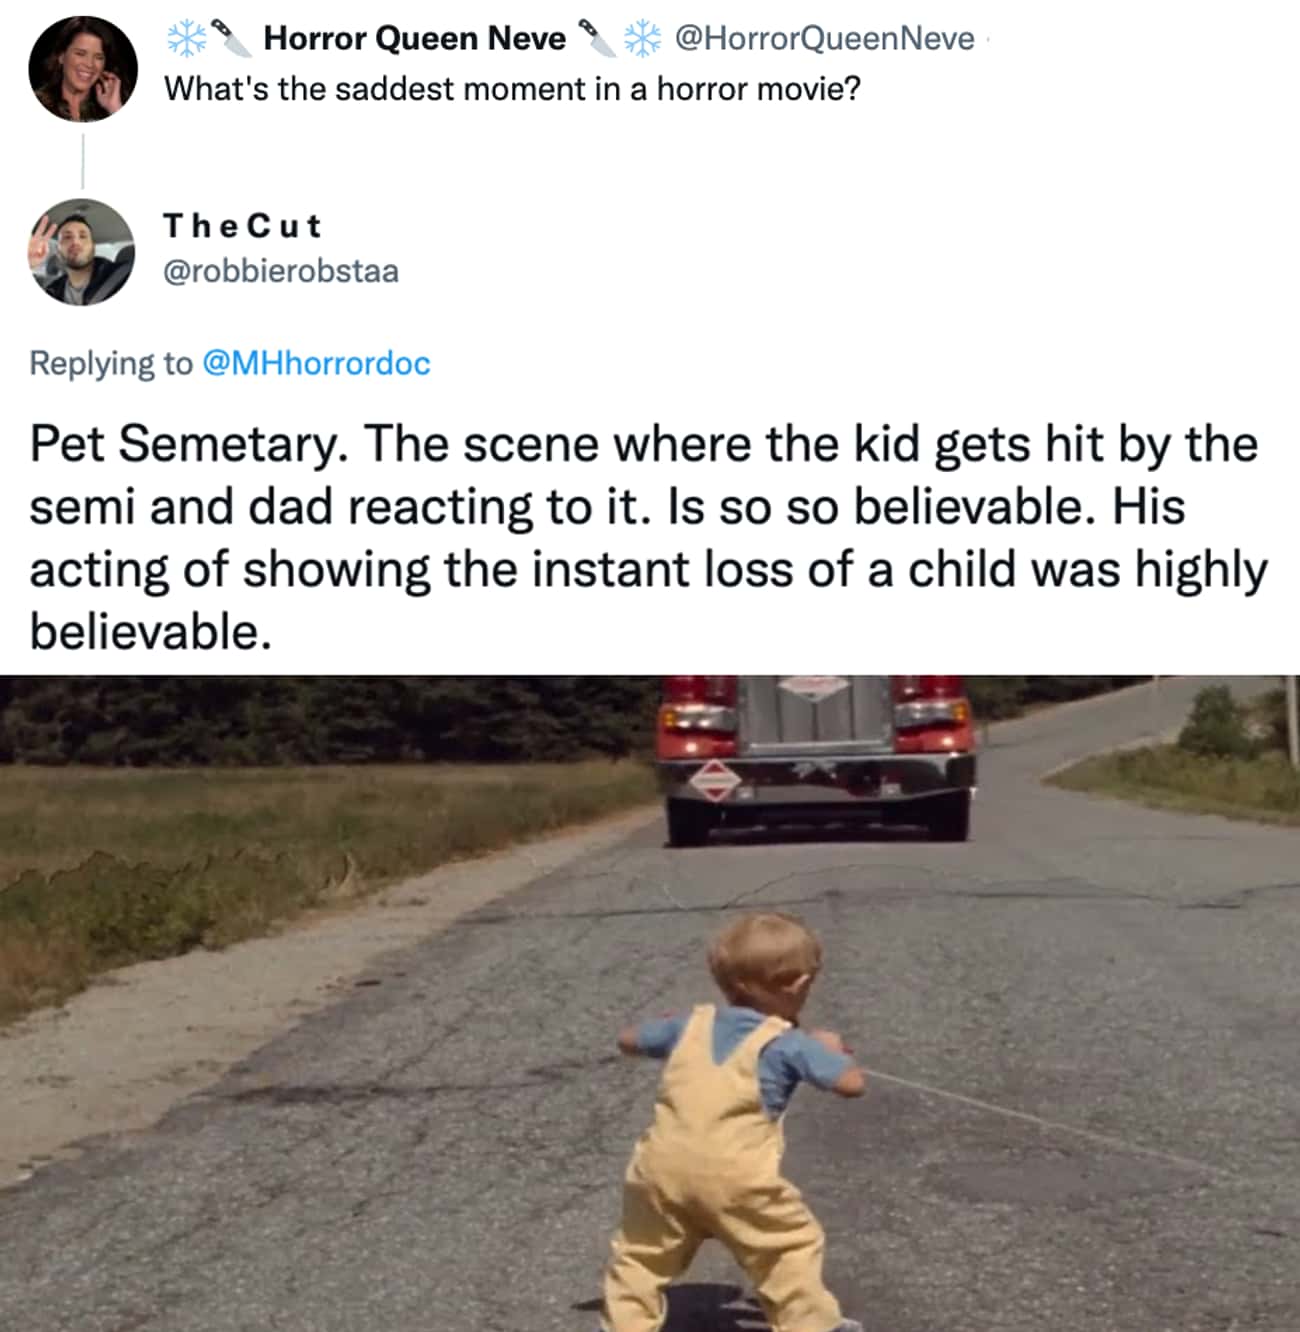 The Death Of Gage In 'Pet Sematary'